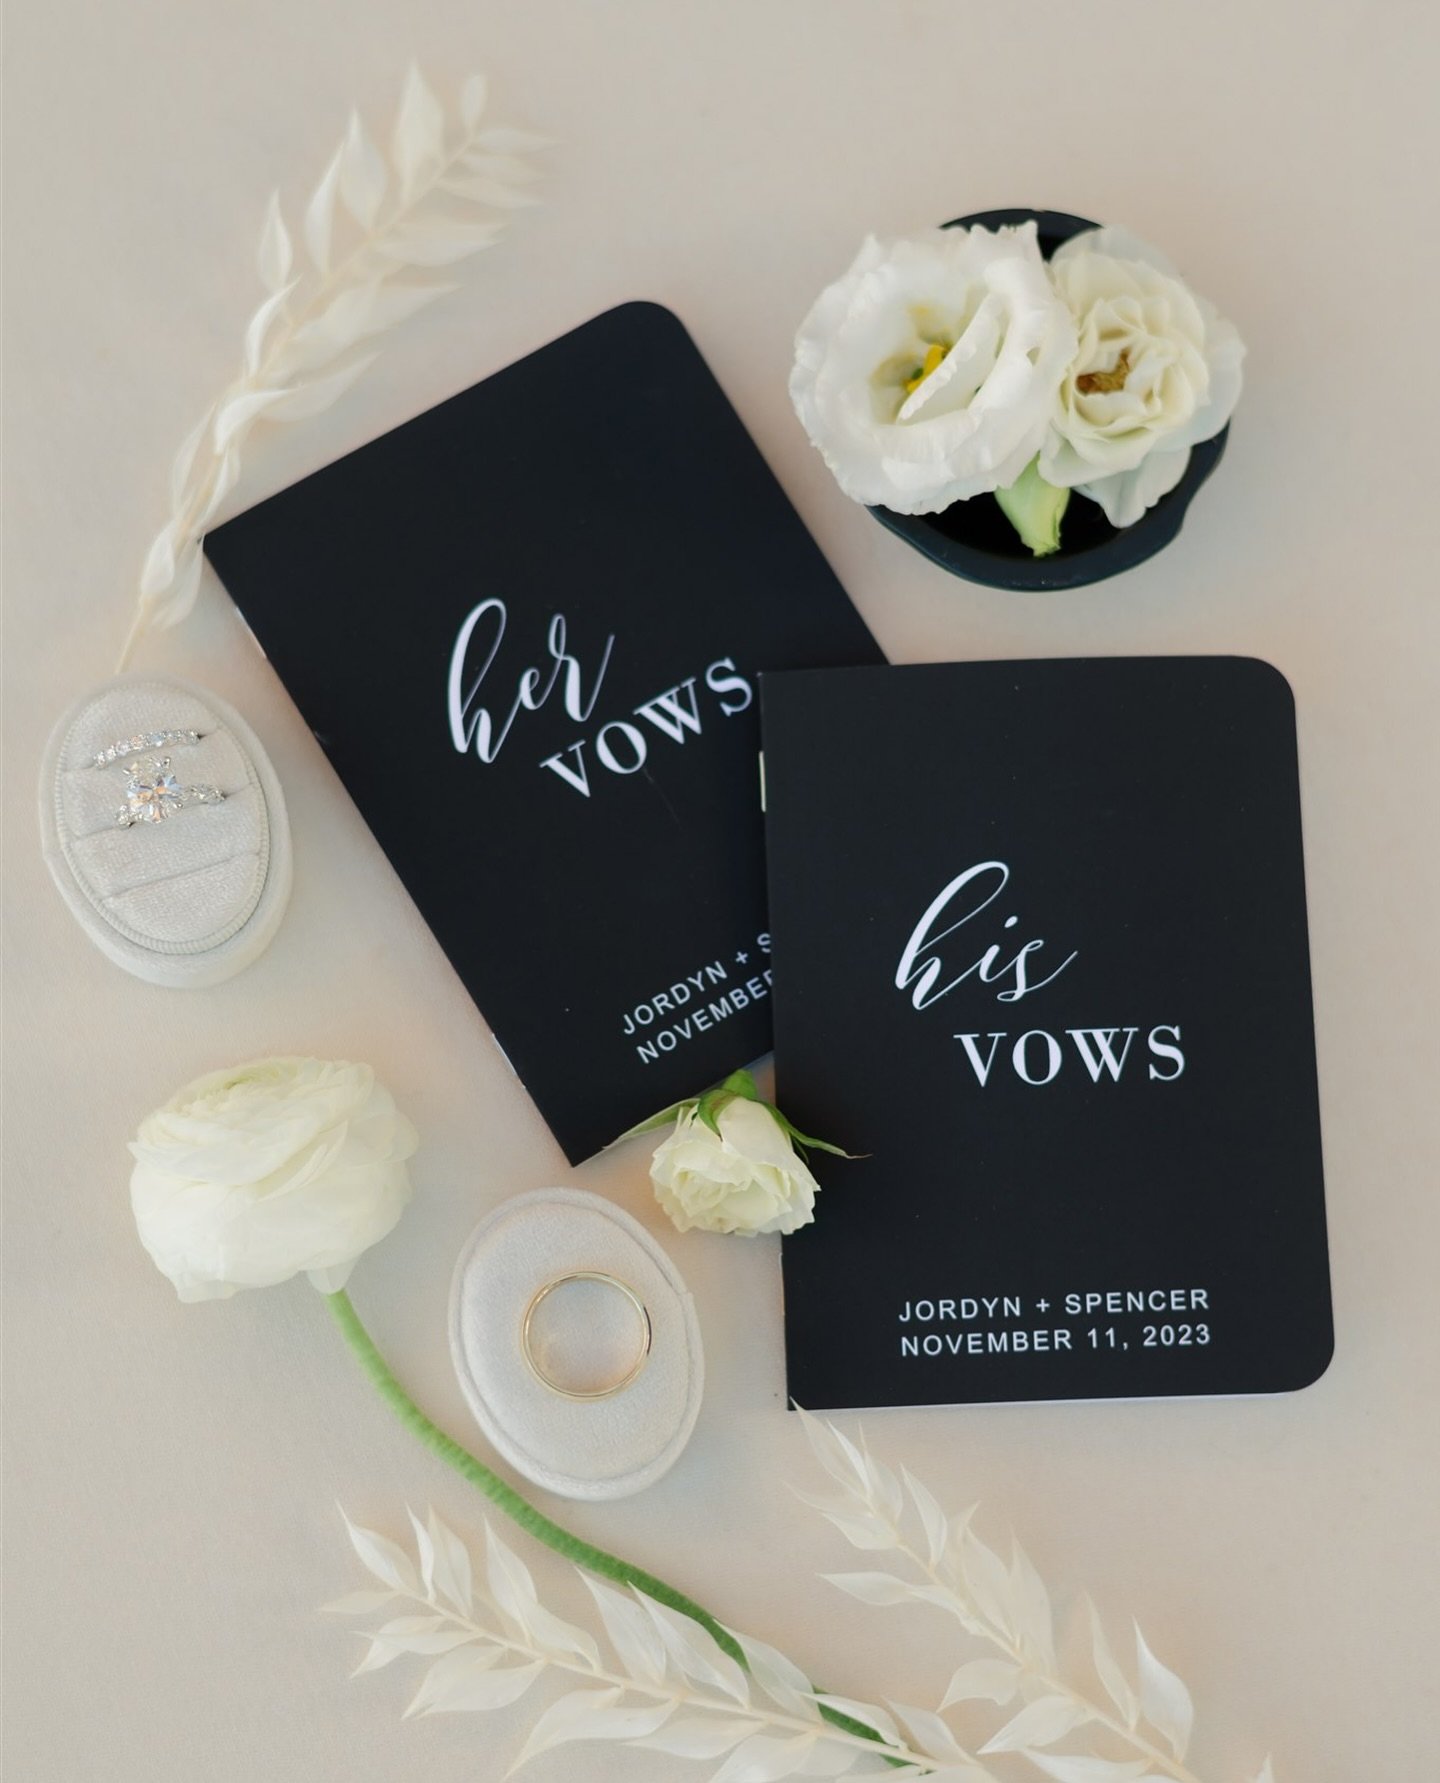 Love these beautiful custom vow books from Jordyn &amp; Spencer&rsquo;s wedding day. 

Having custom booklets for your vows makes it easy for your officiant to hand them to you during ceremony &amp; they&rsquo;ll forever be a keepsake from your speci